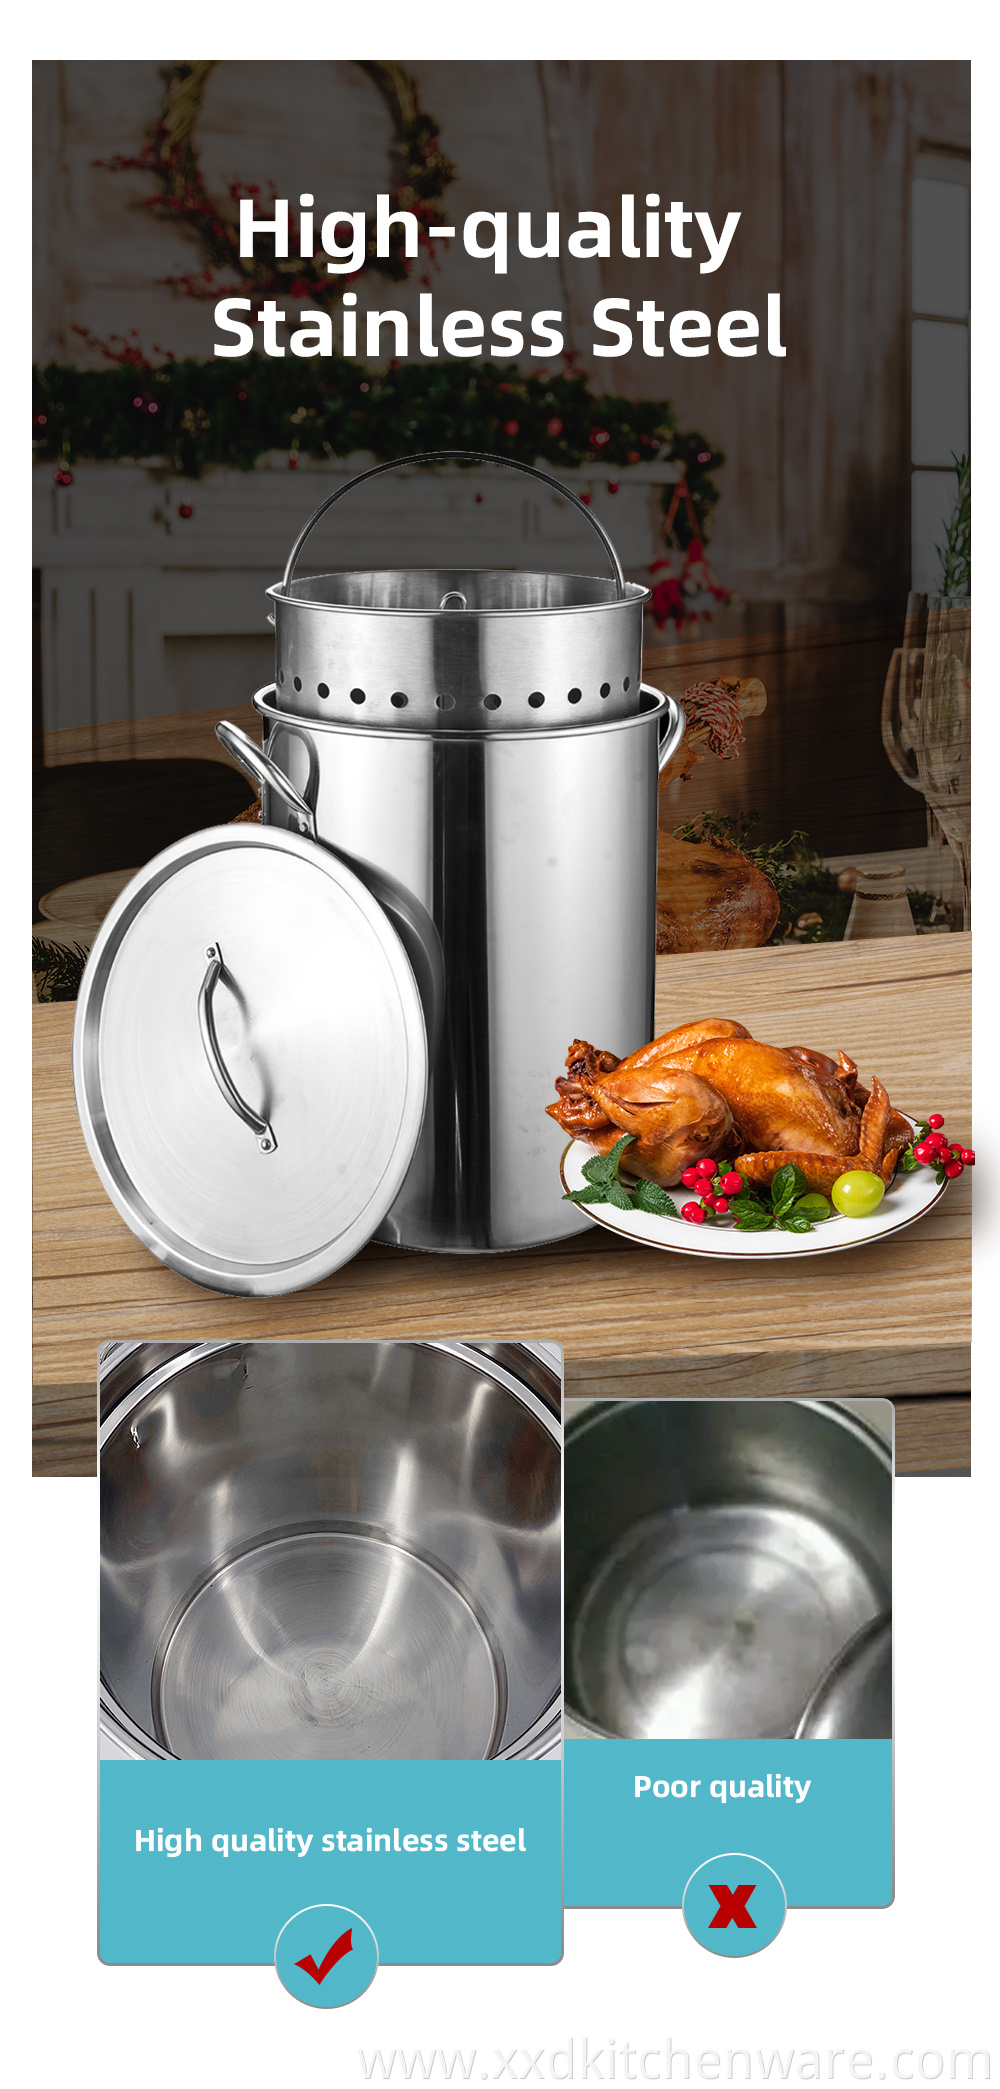 Large capacity stainless steel turkey pot sets